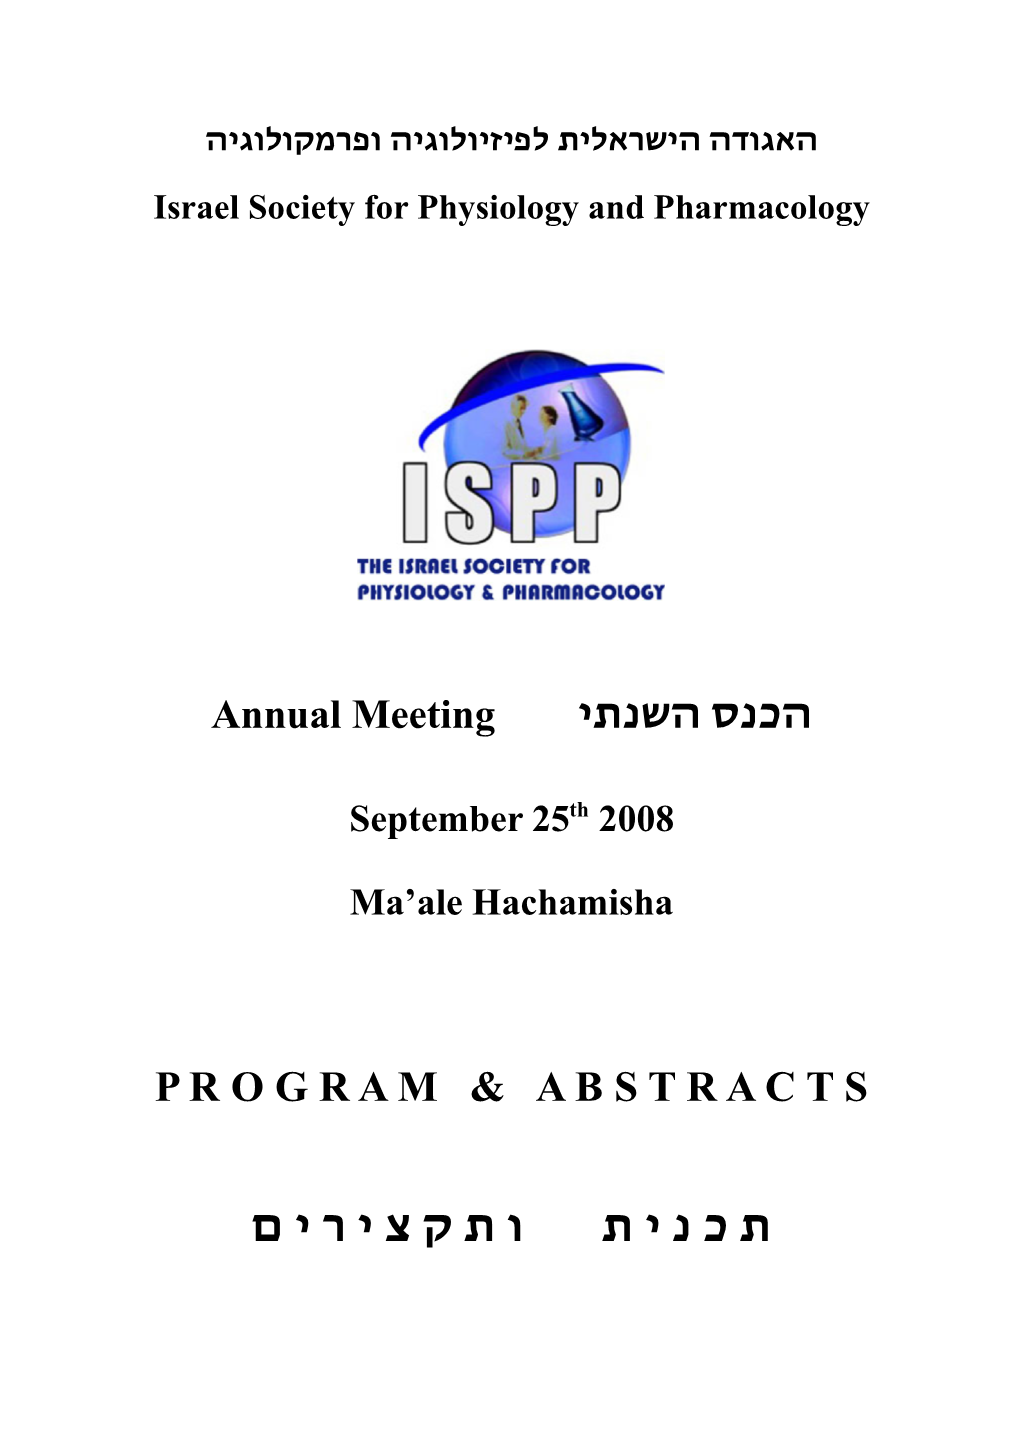 ISPP 2008 Program and Abstracts